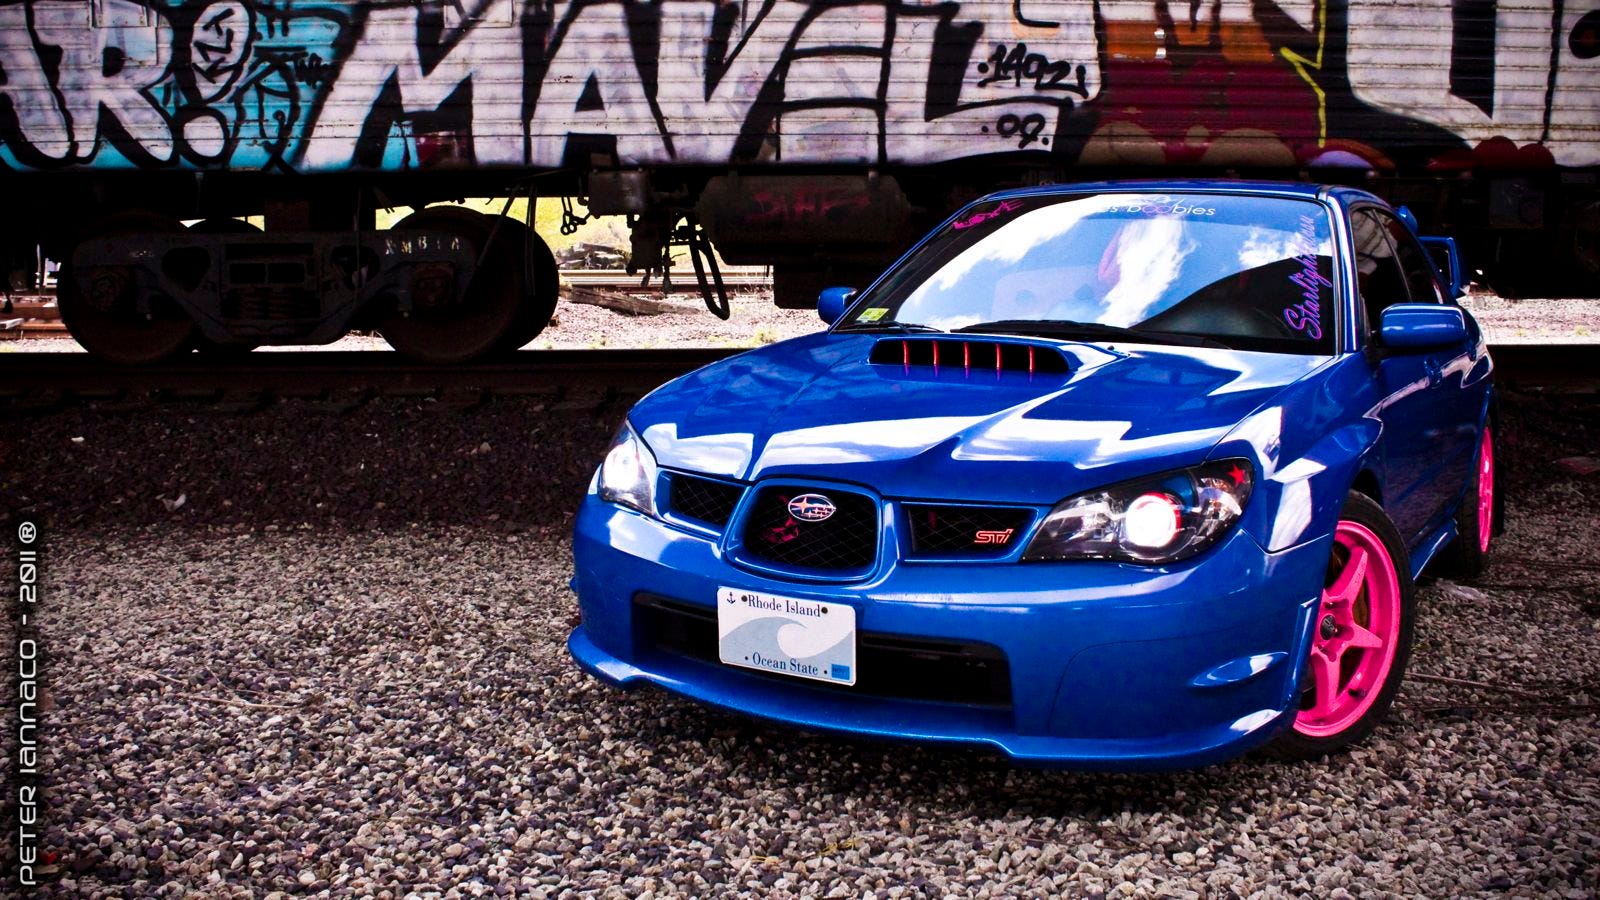 Your Ridiculously Cool Subaru WRX STI Wallpaper Is Here